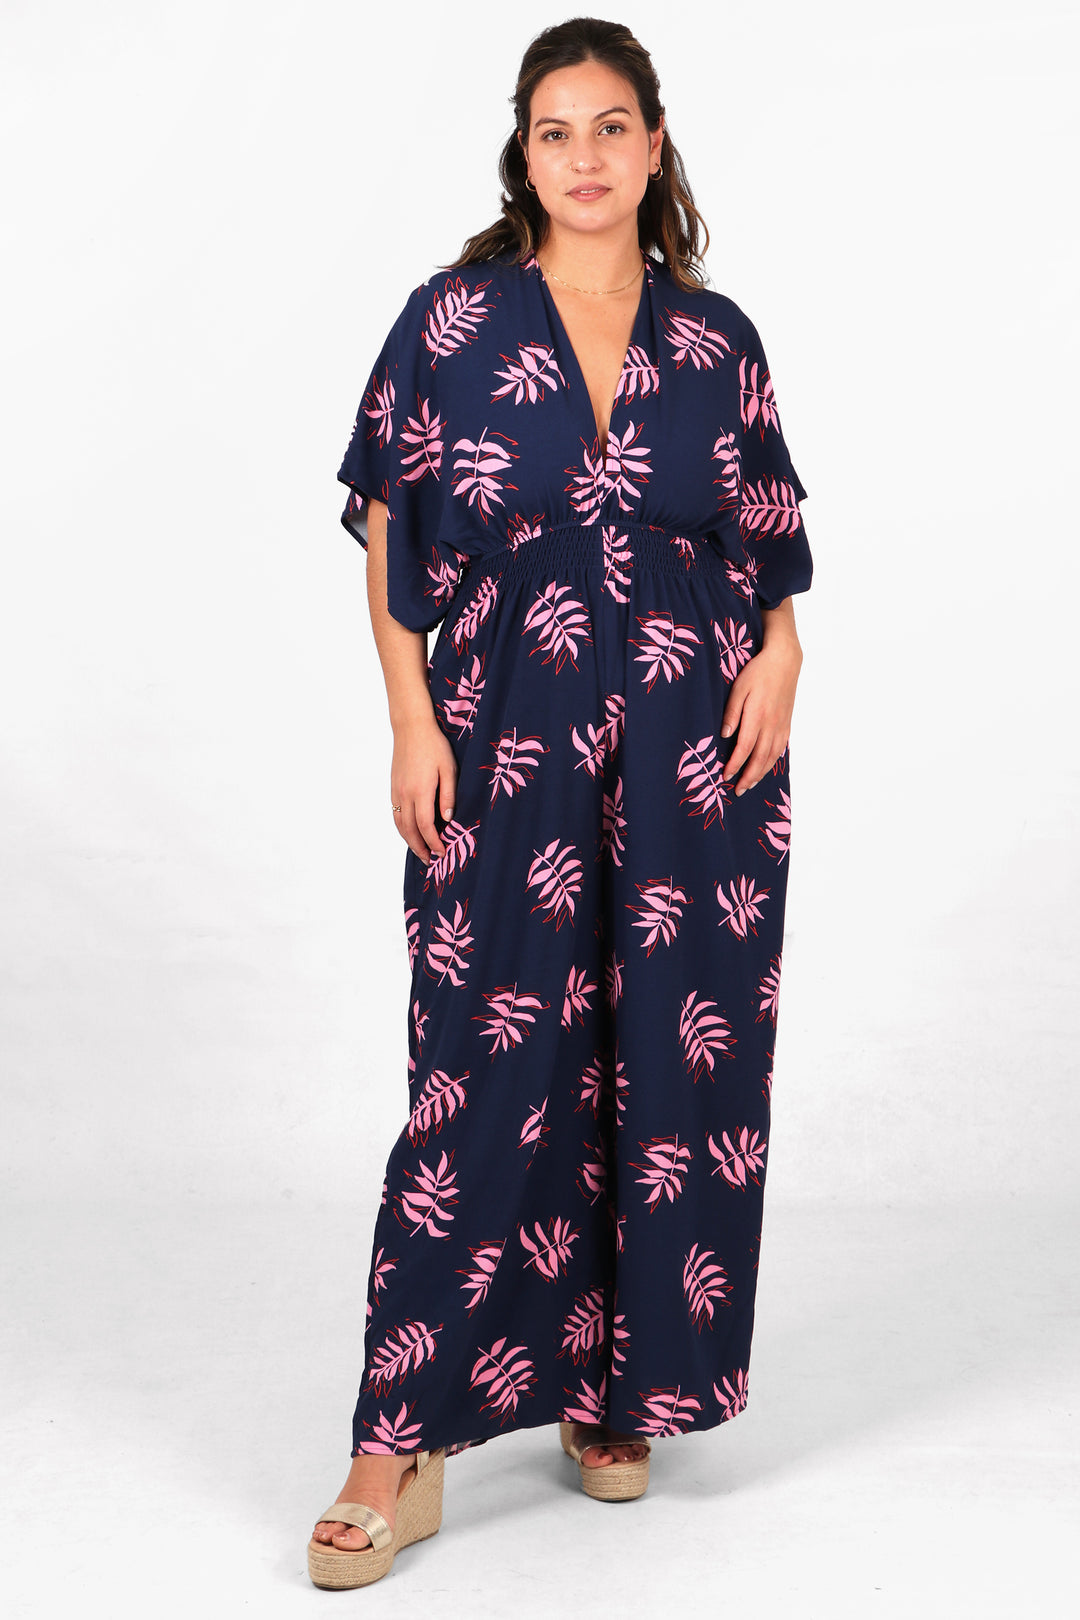 model wearing a navy blue jumpsuit with an all over pattern of pink palm leaves. the jumpsuit has a deep v neck, elbow length angel sleeves and a shirred waist